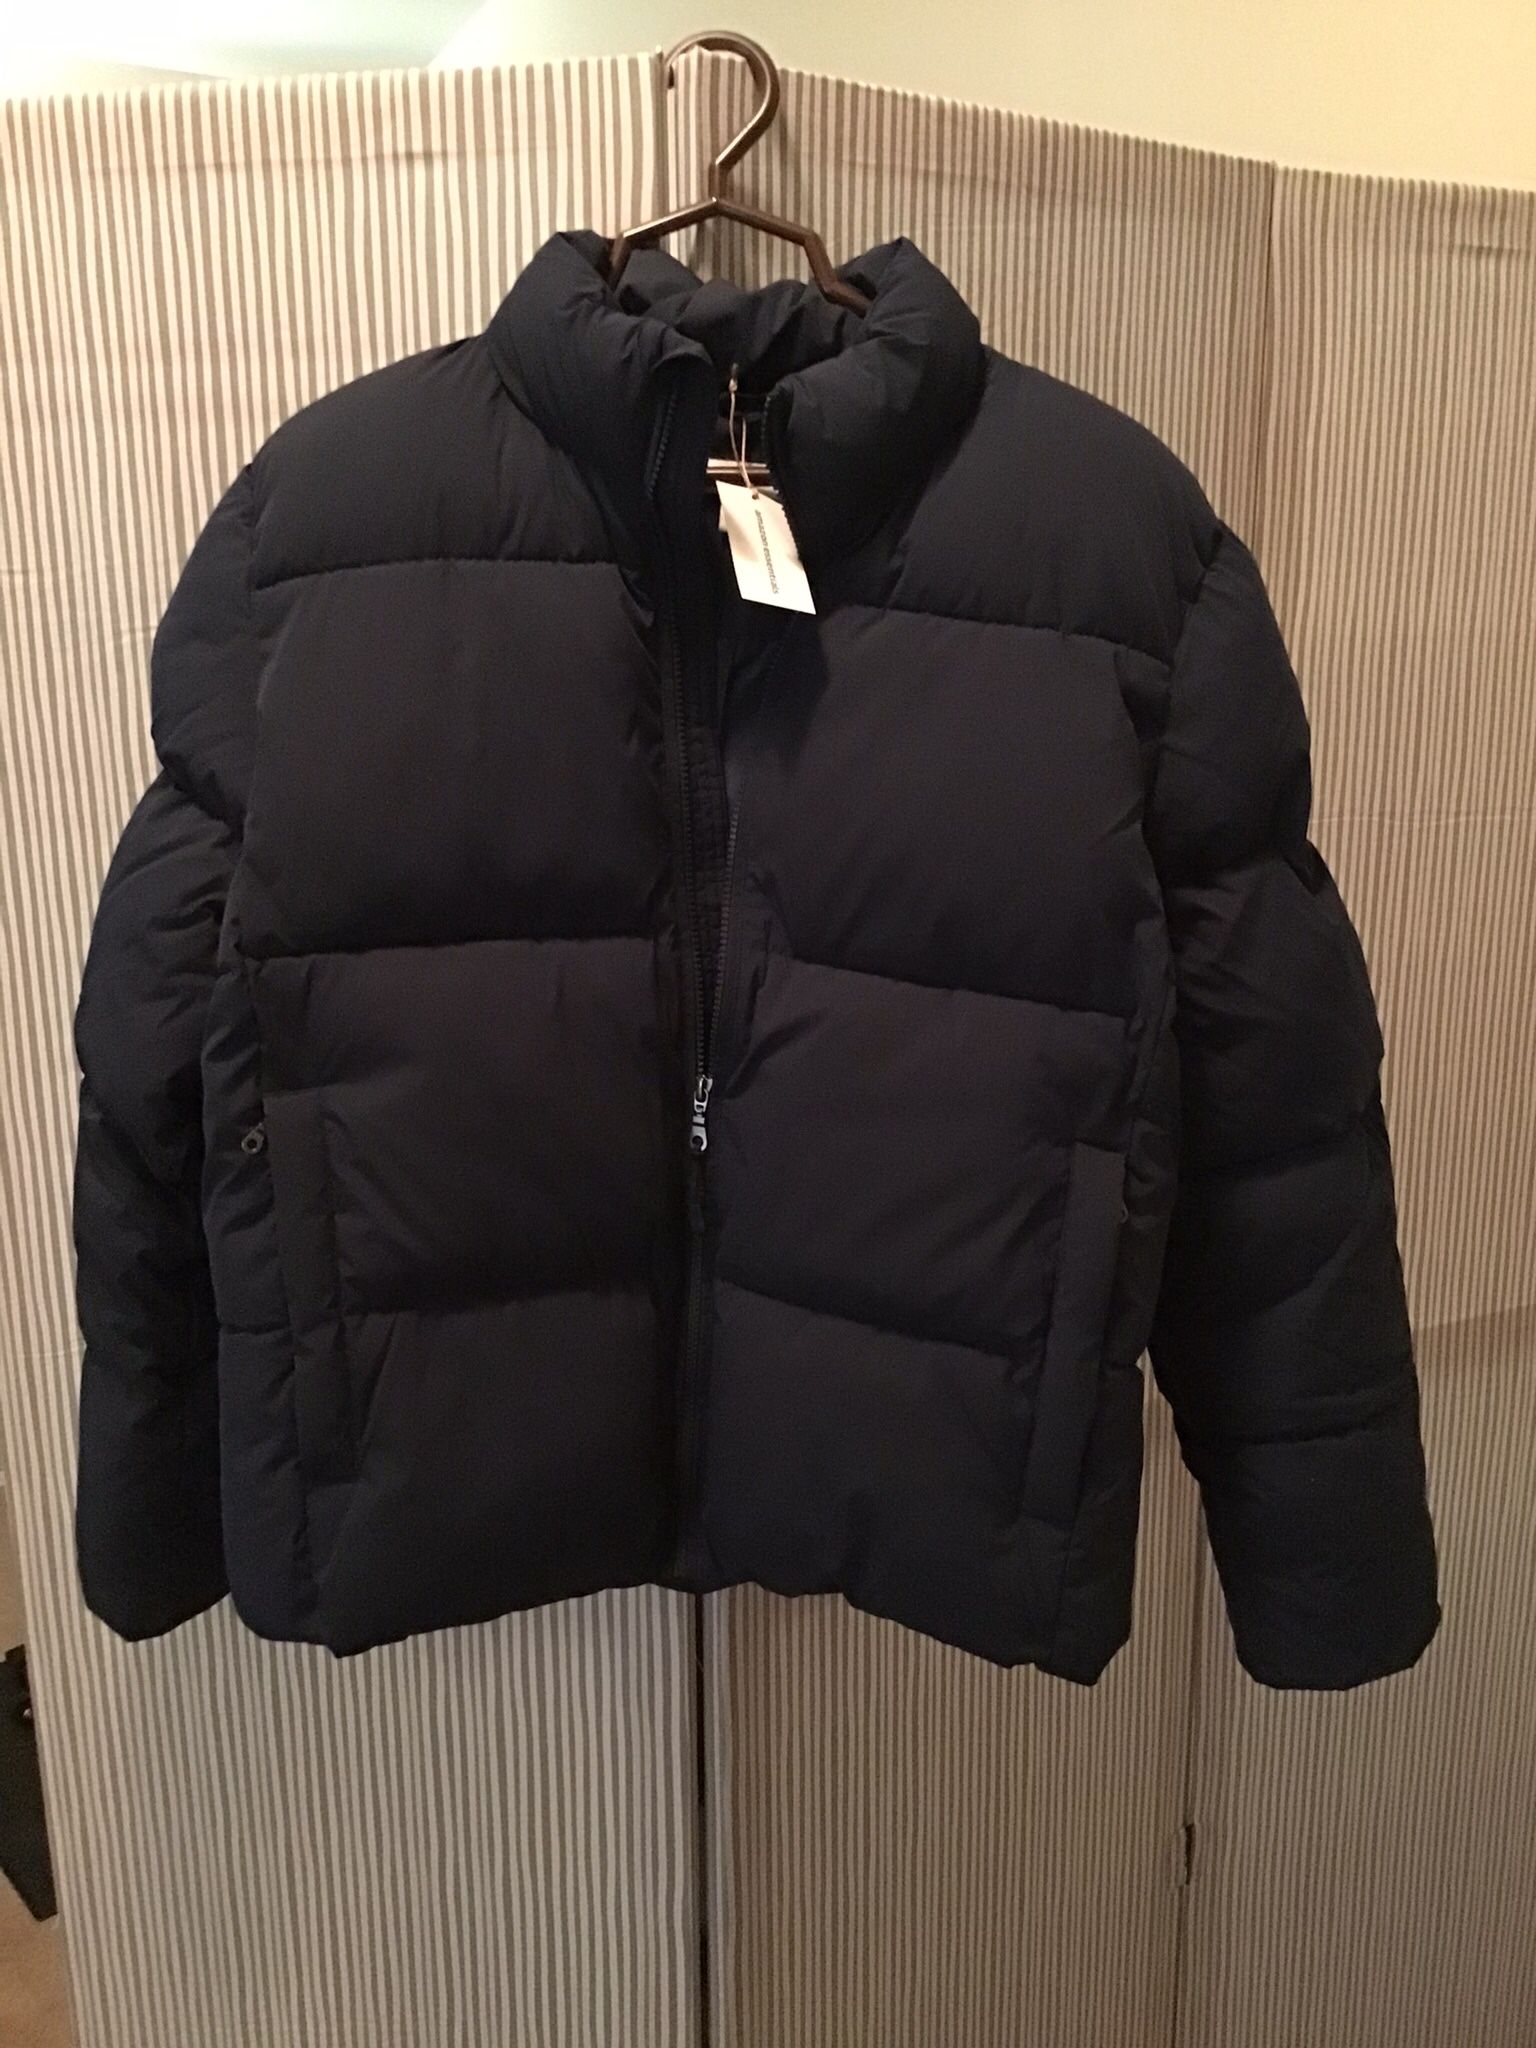 Mens Small Puffer Jacket